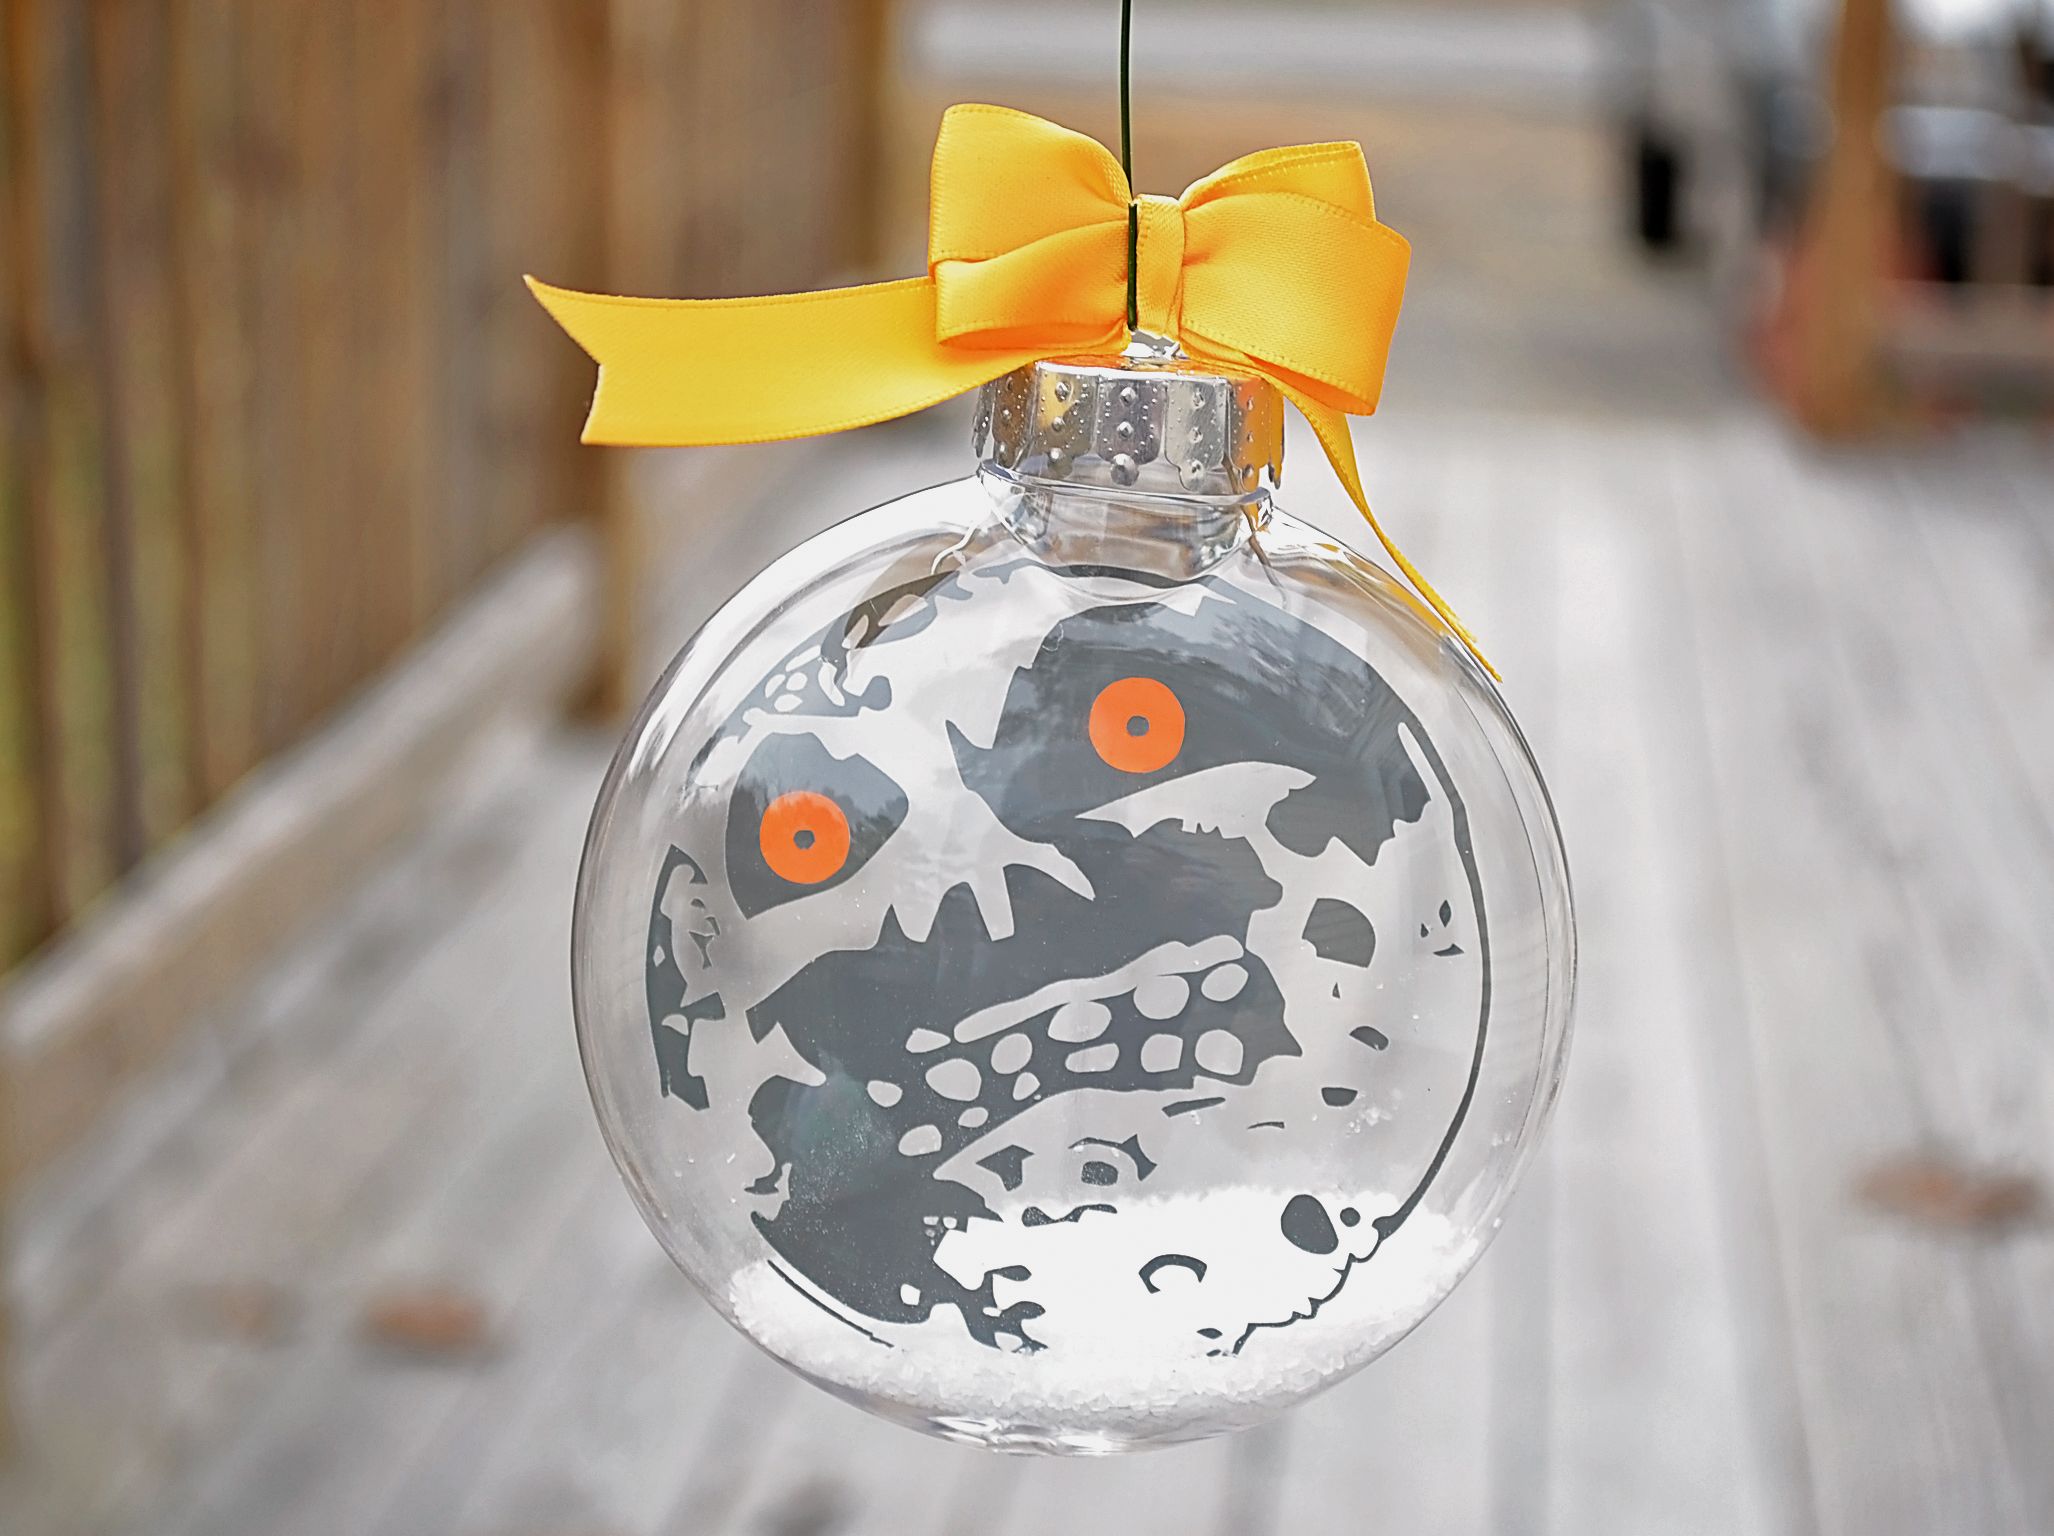 All I want for Christmas is impending doom!